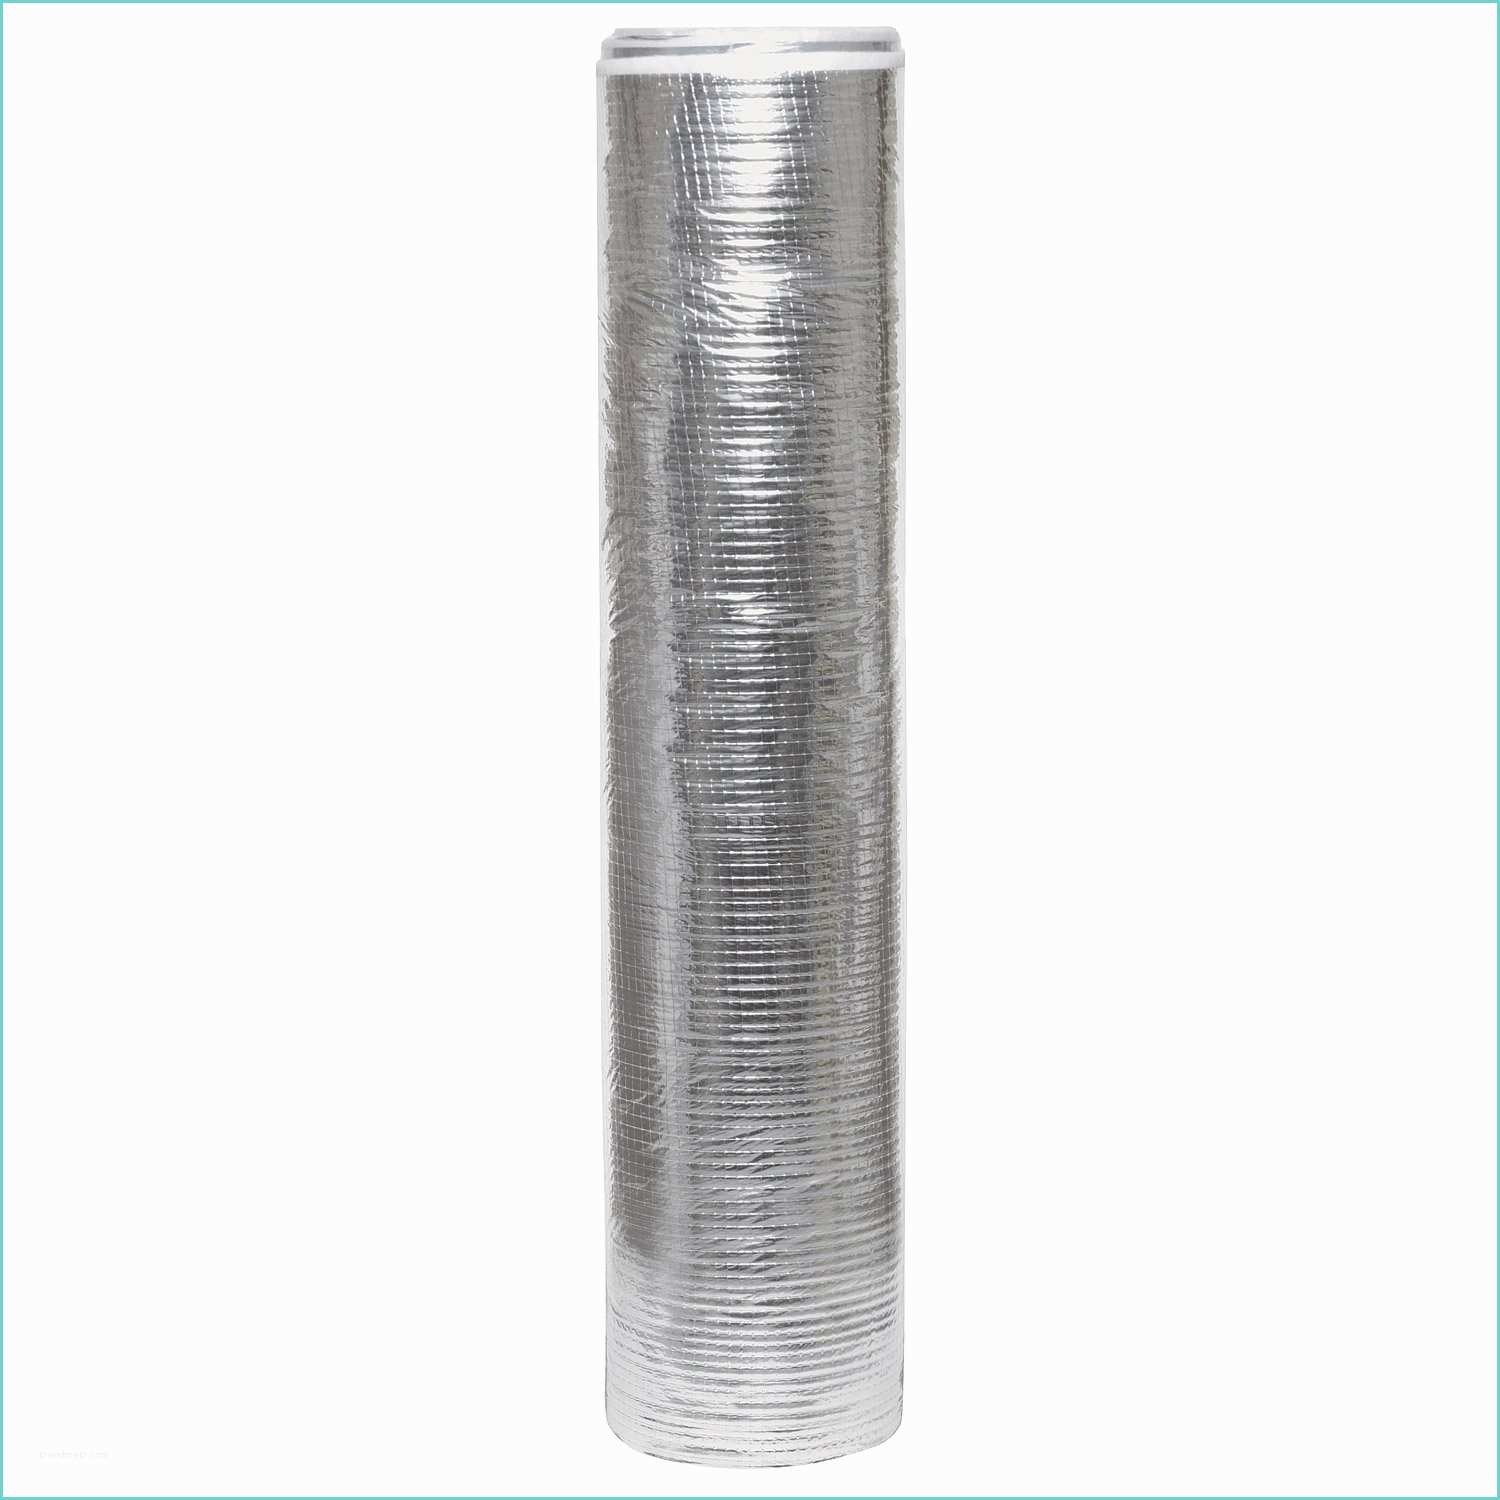 Rouleau Film Plastique Leroy Merlin Rouleau isolant Mince isothermo 24 16m²